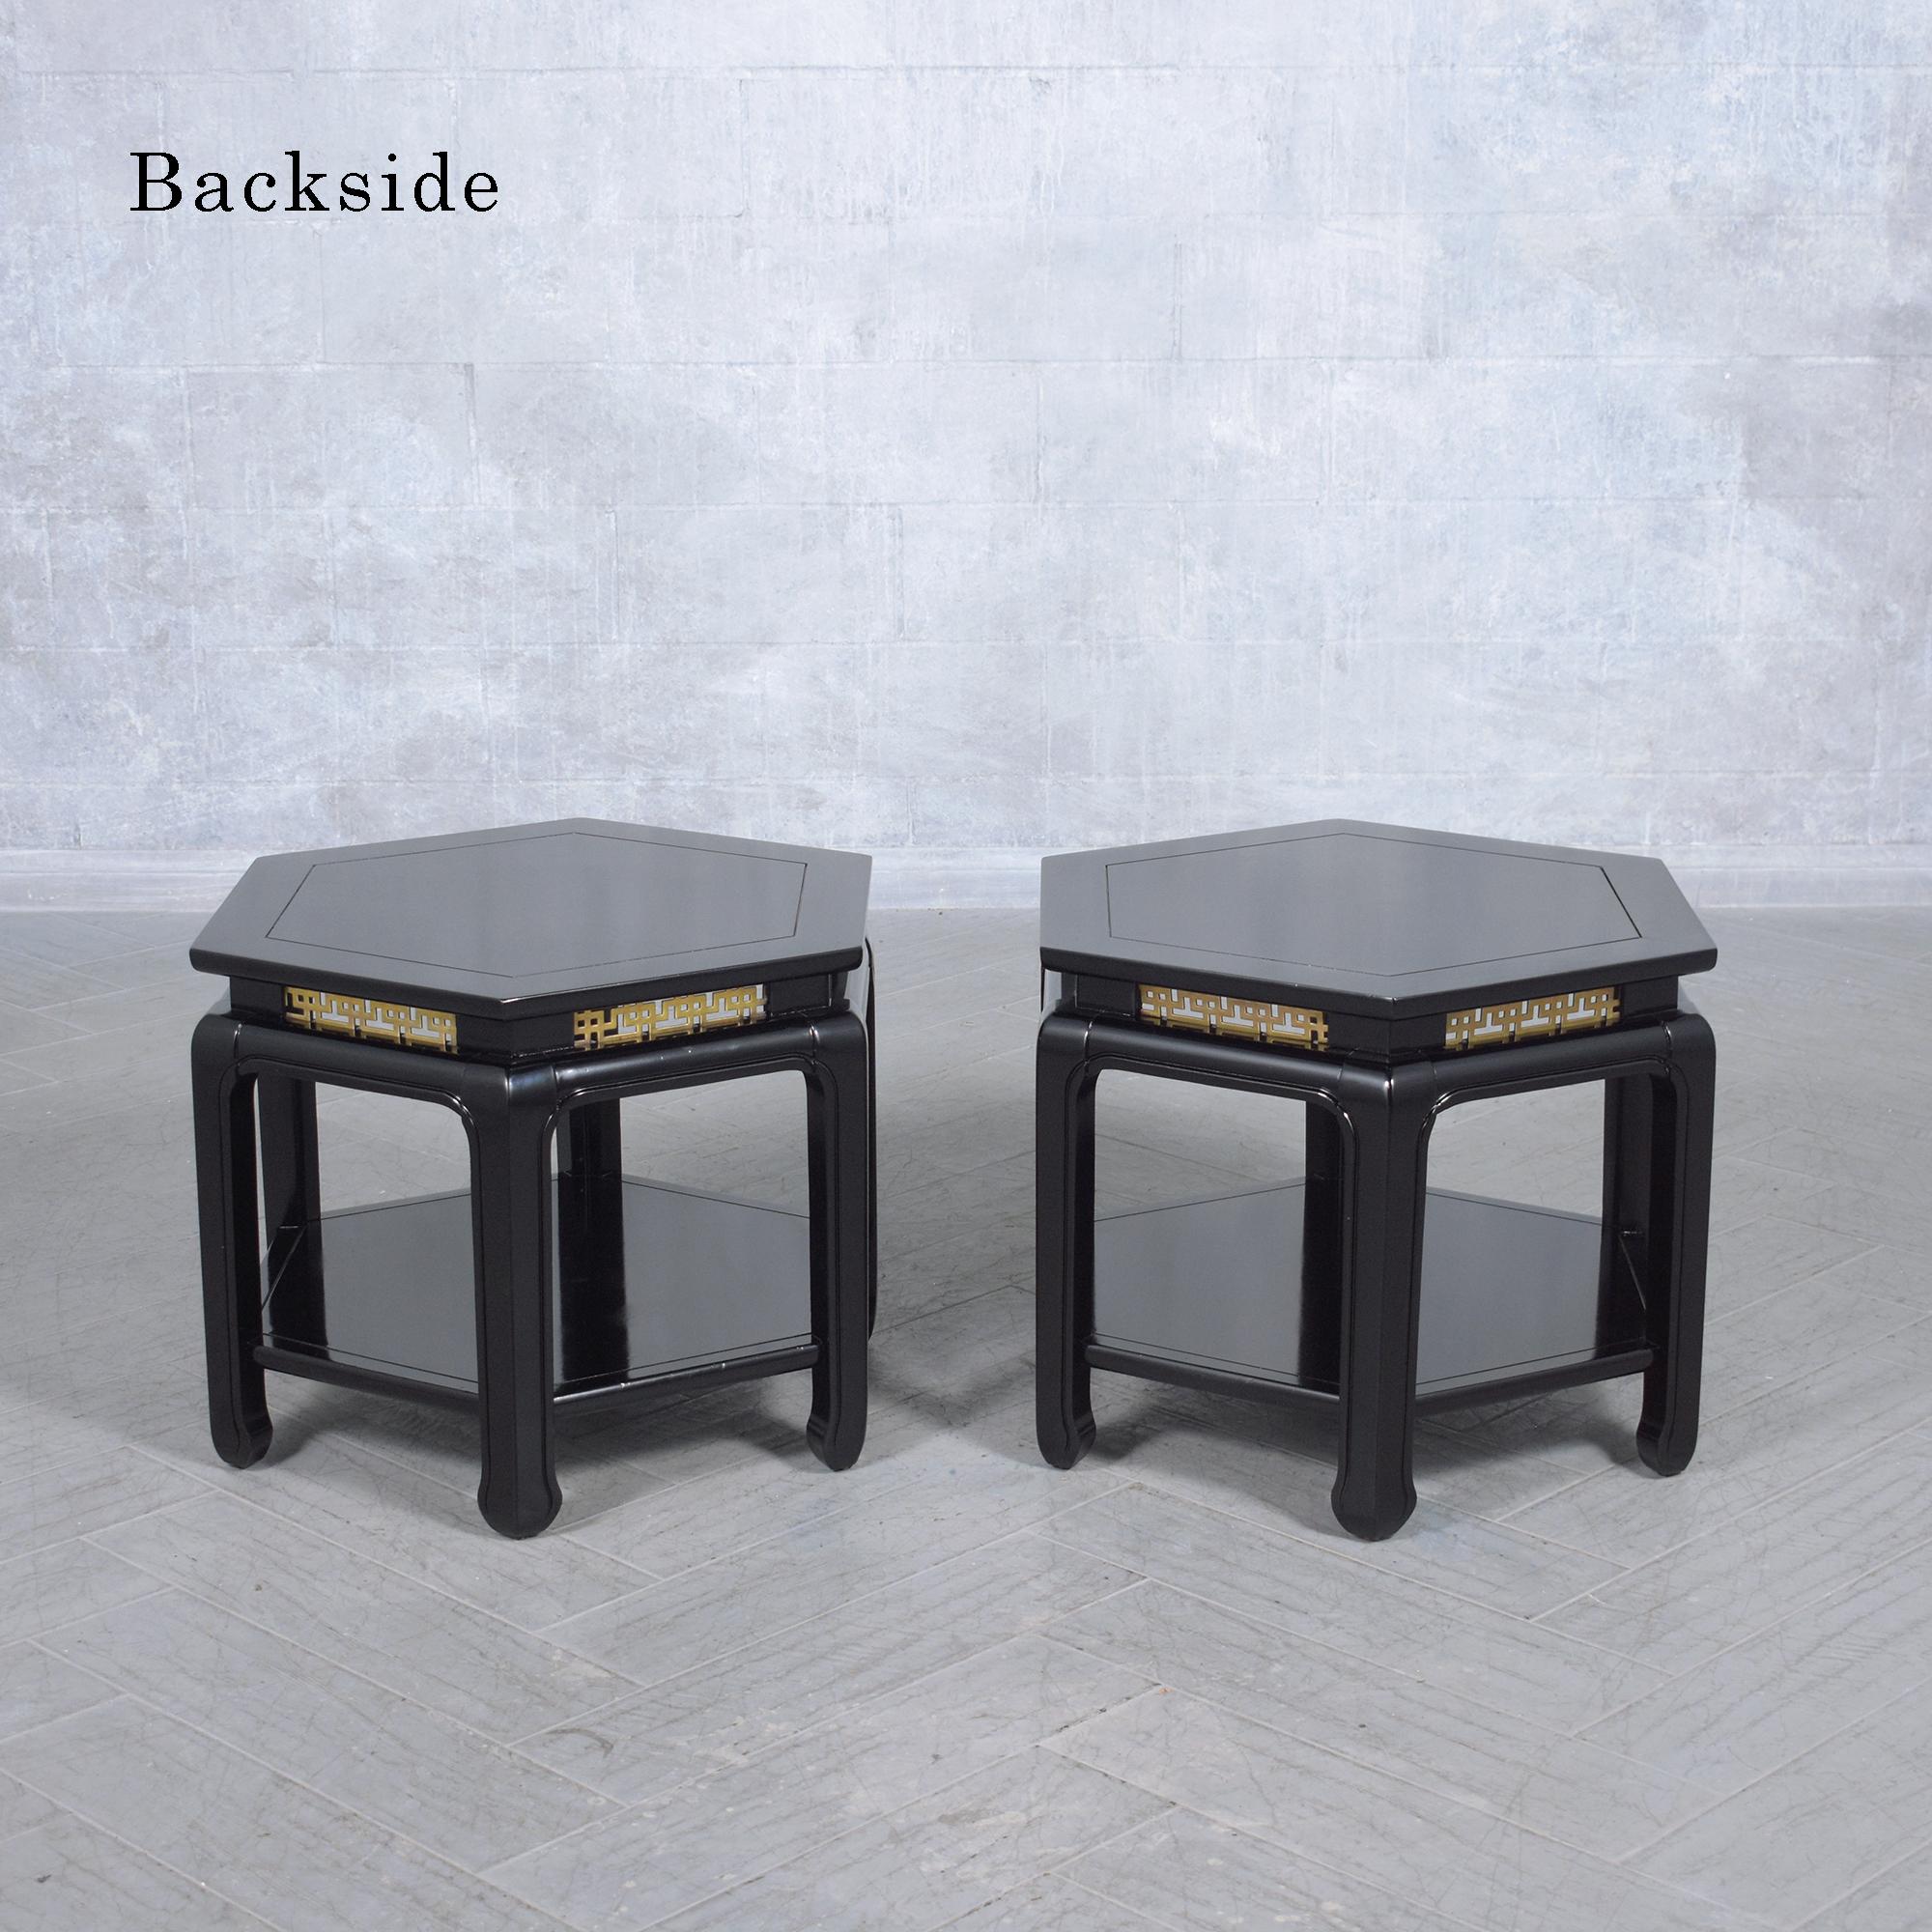 20th Century Hexagon Ebonized Mahogany Side Tables by J.B. Van Sciver Co. In Good Condition For Sale In Los Angeles, CA